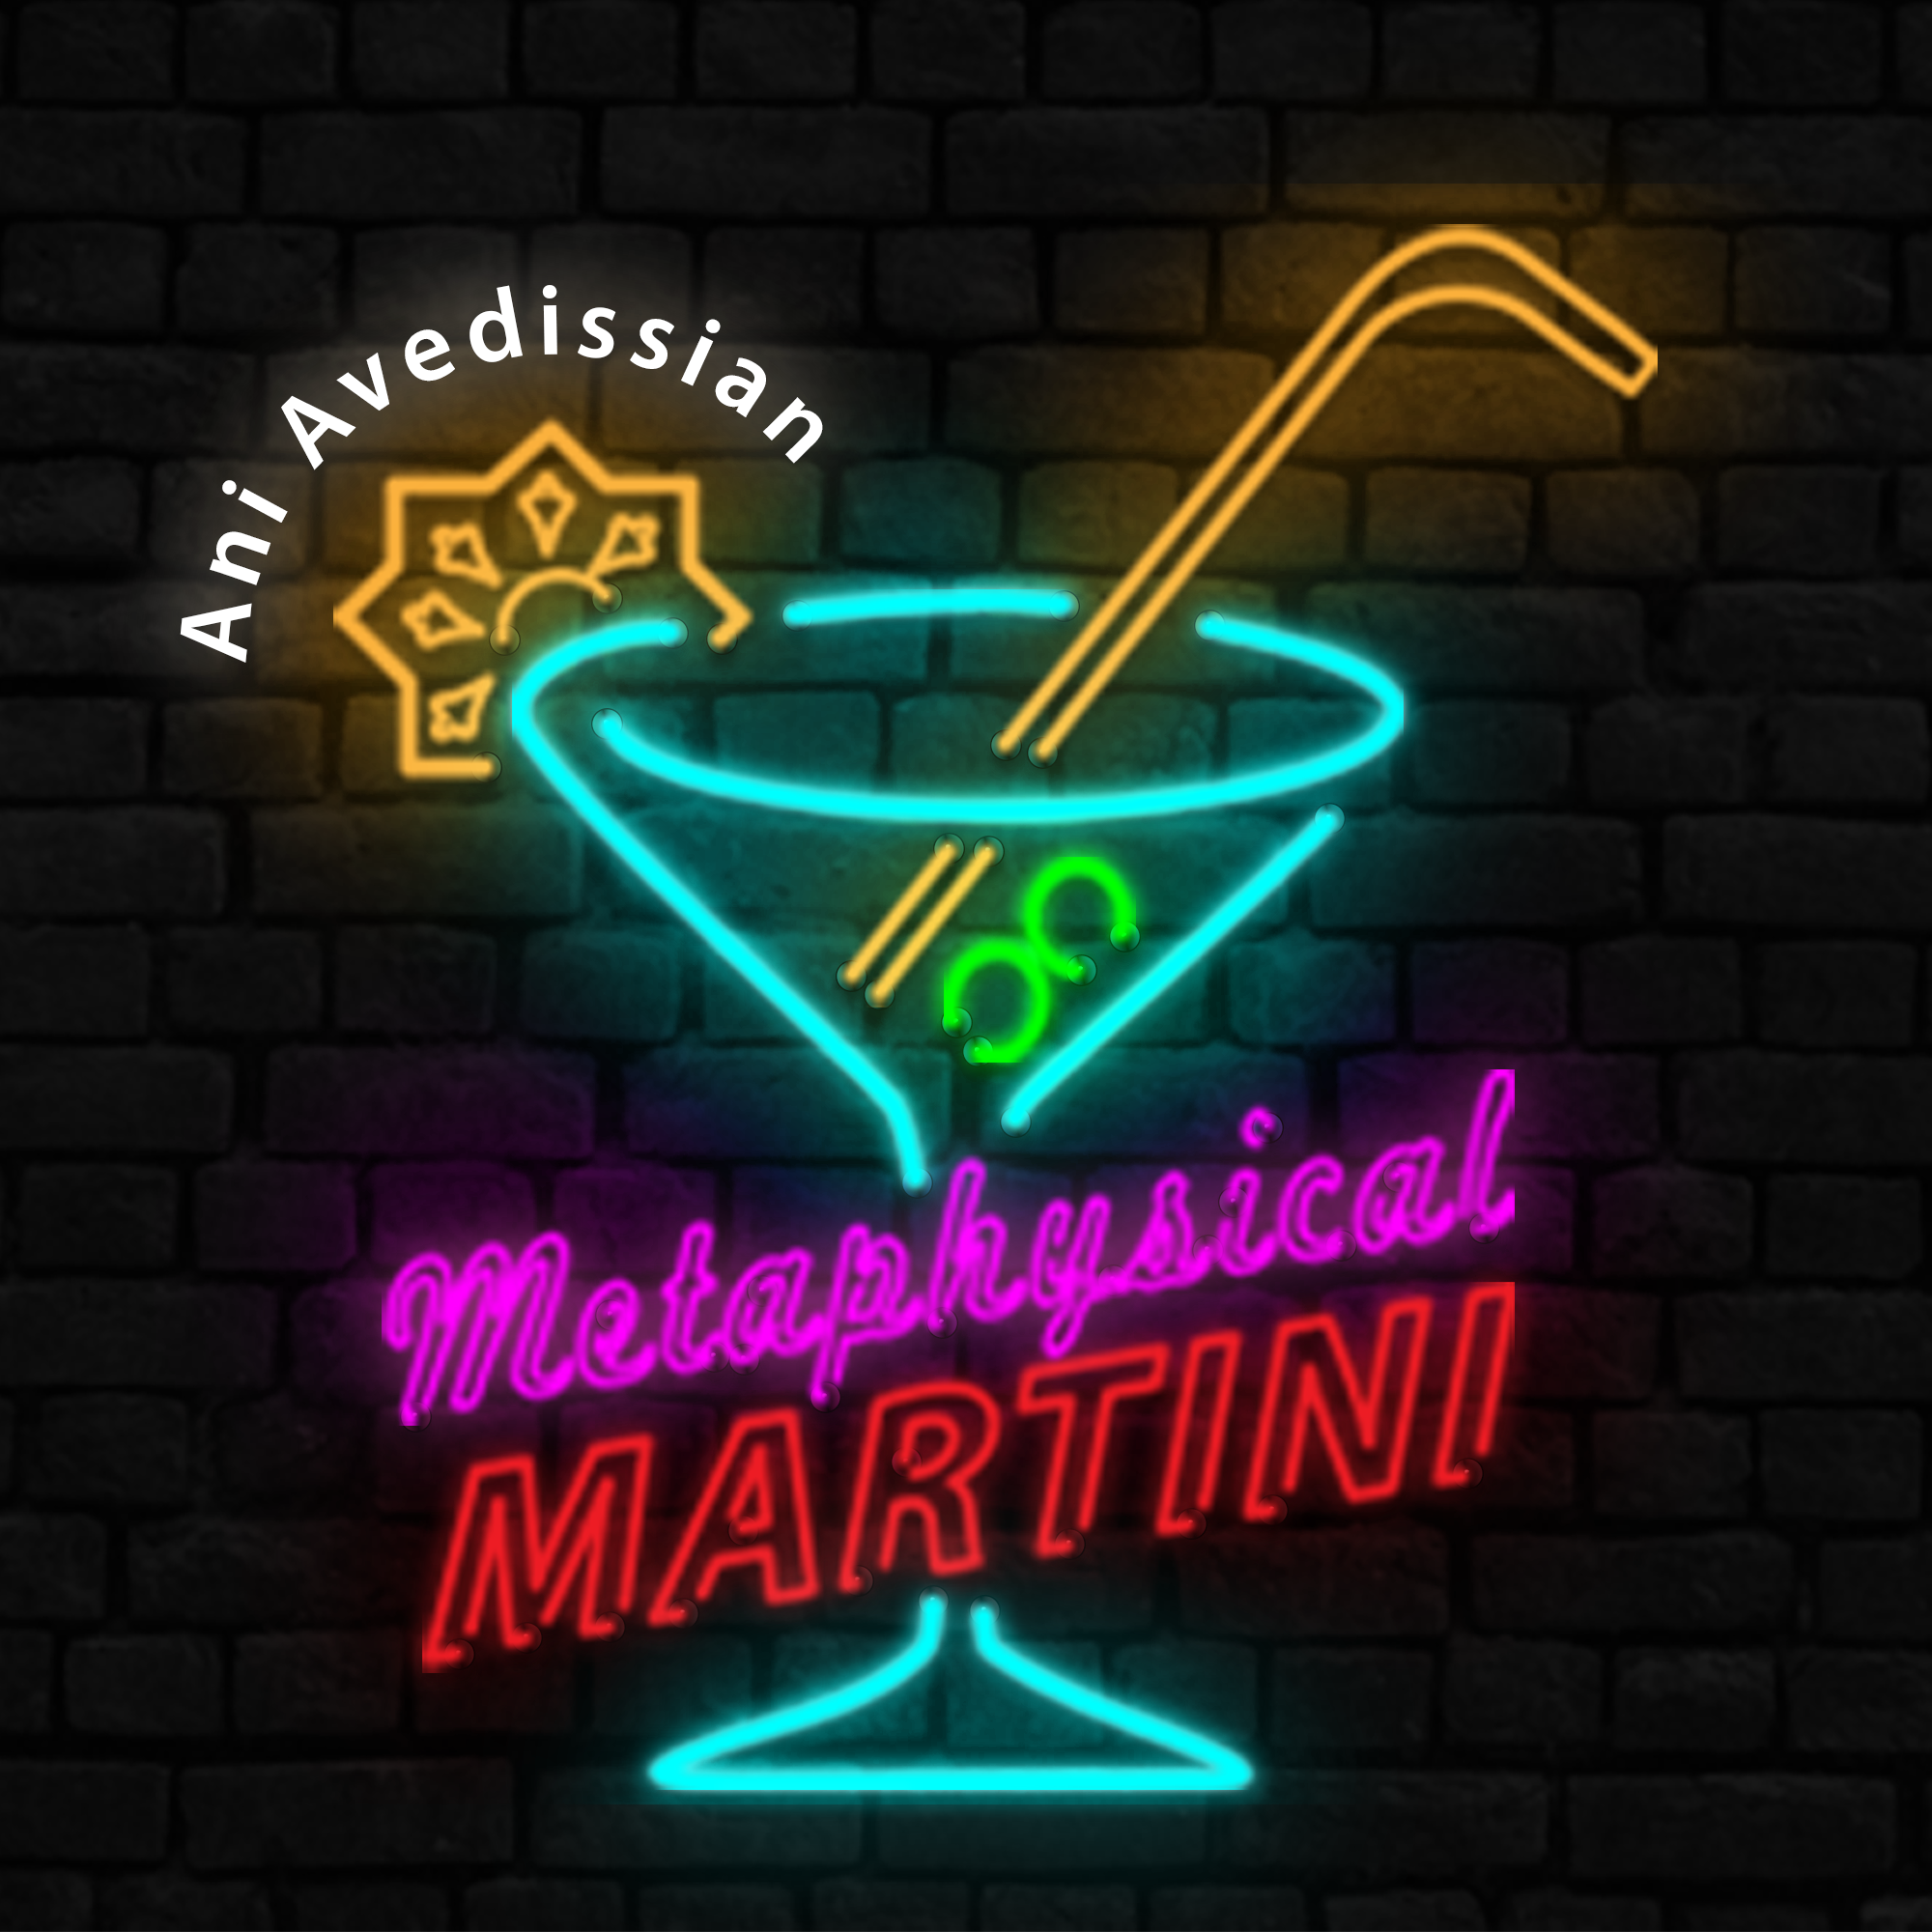 "Metaphysical Martini"   02/19/2020  Another exciting hour - questions, suggestions,  confessions.  Oh my!